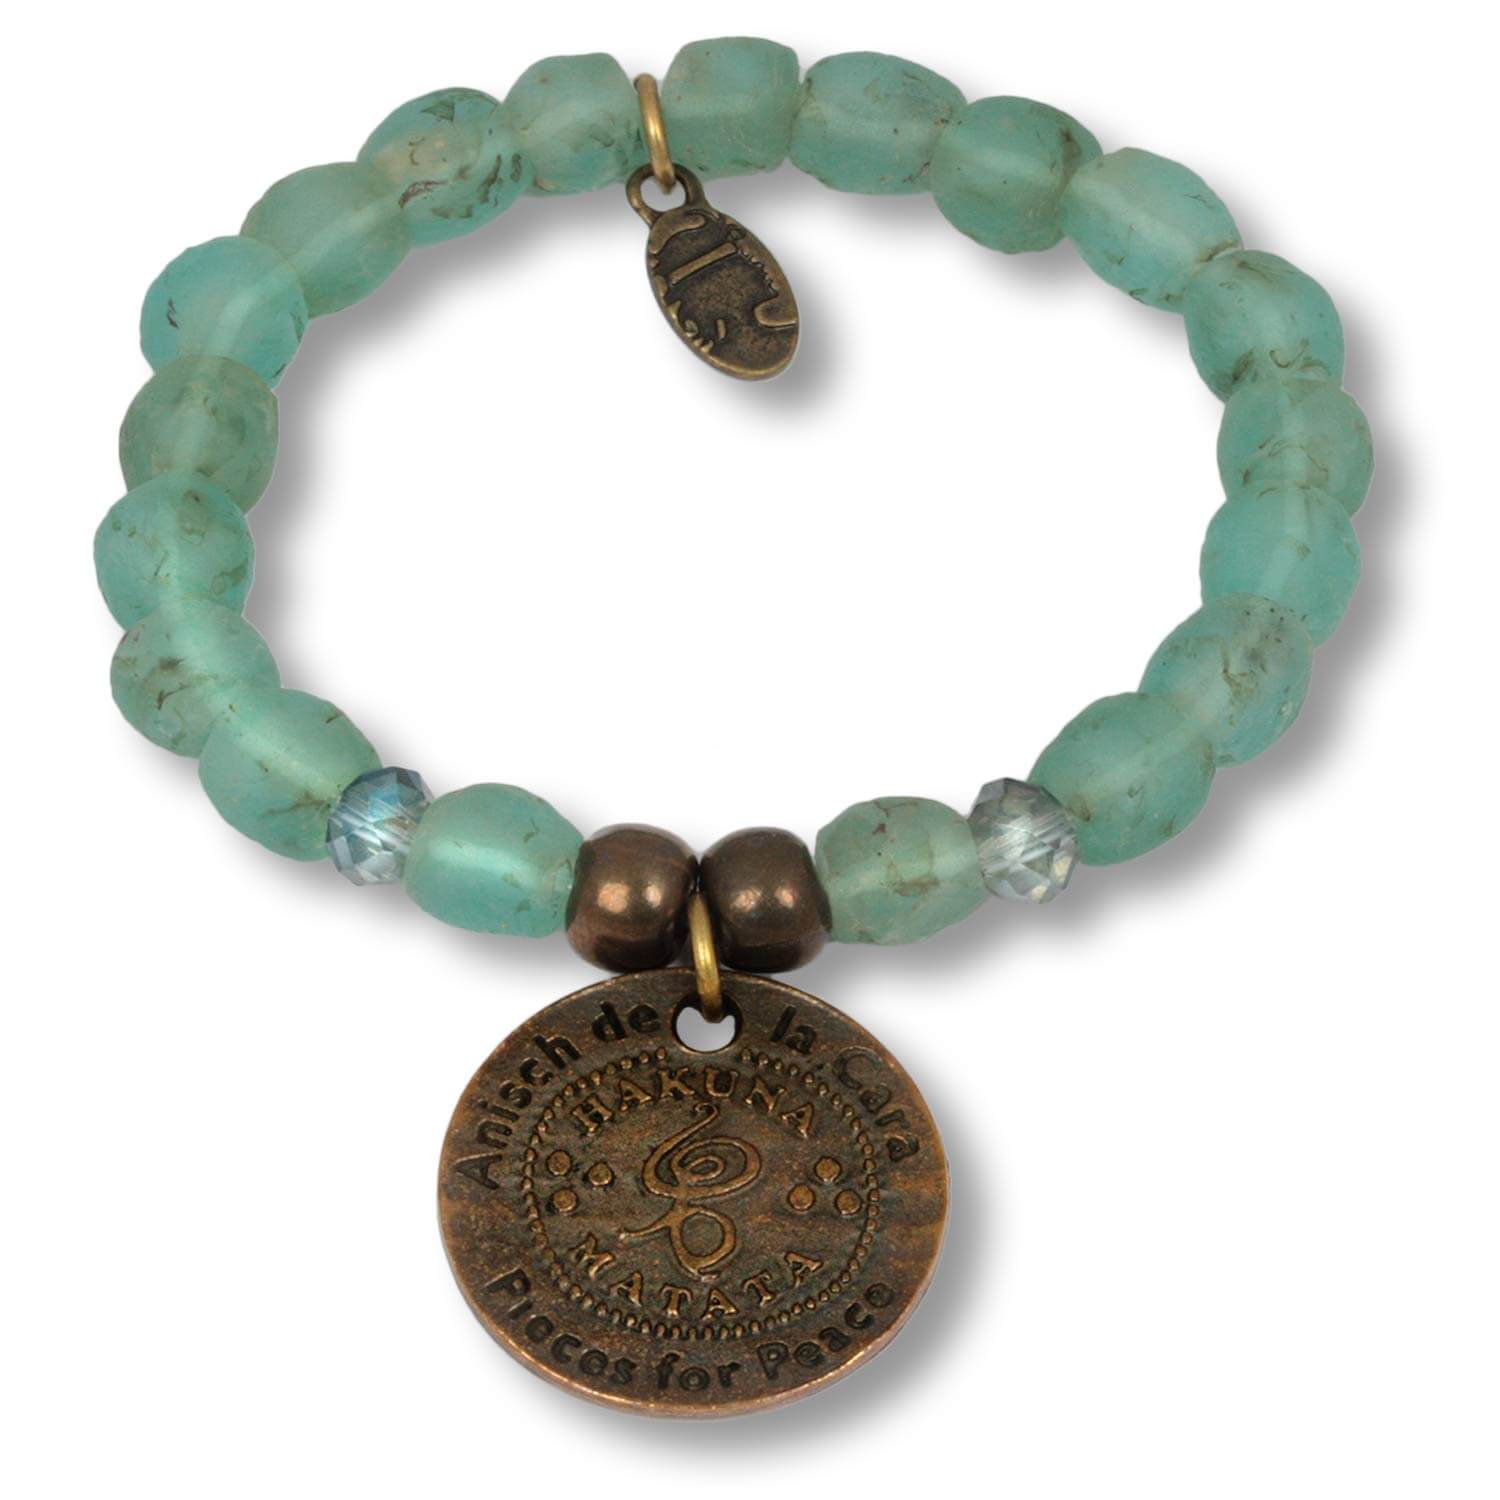 Mint Green Hakuna Matata Beads - coin bracelet made of recycled glass beads